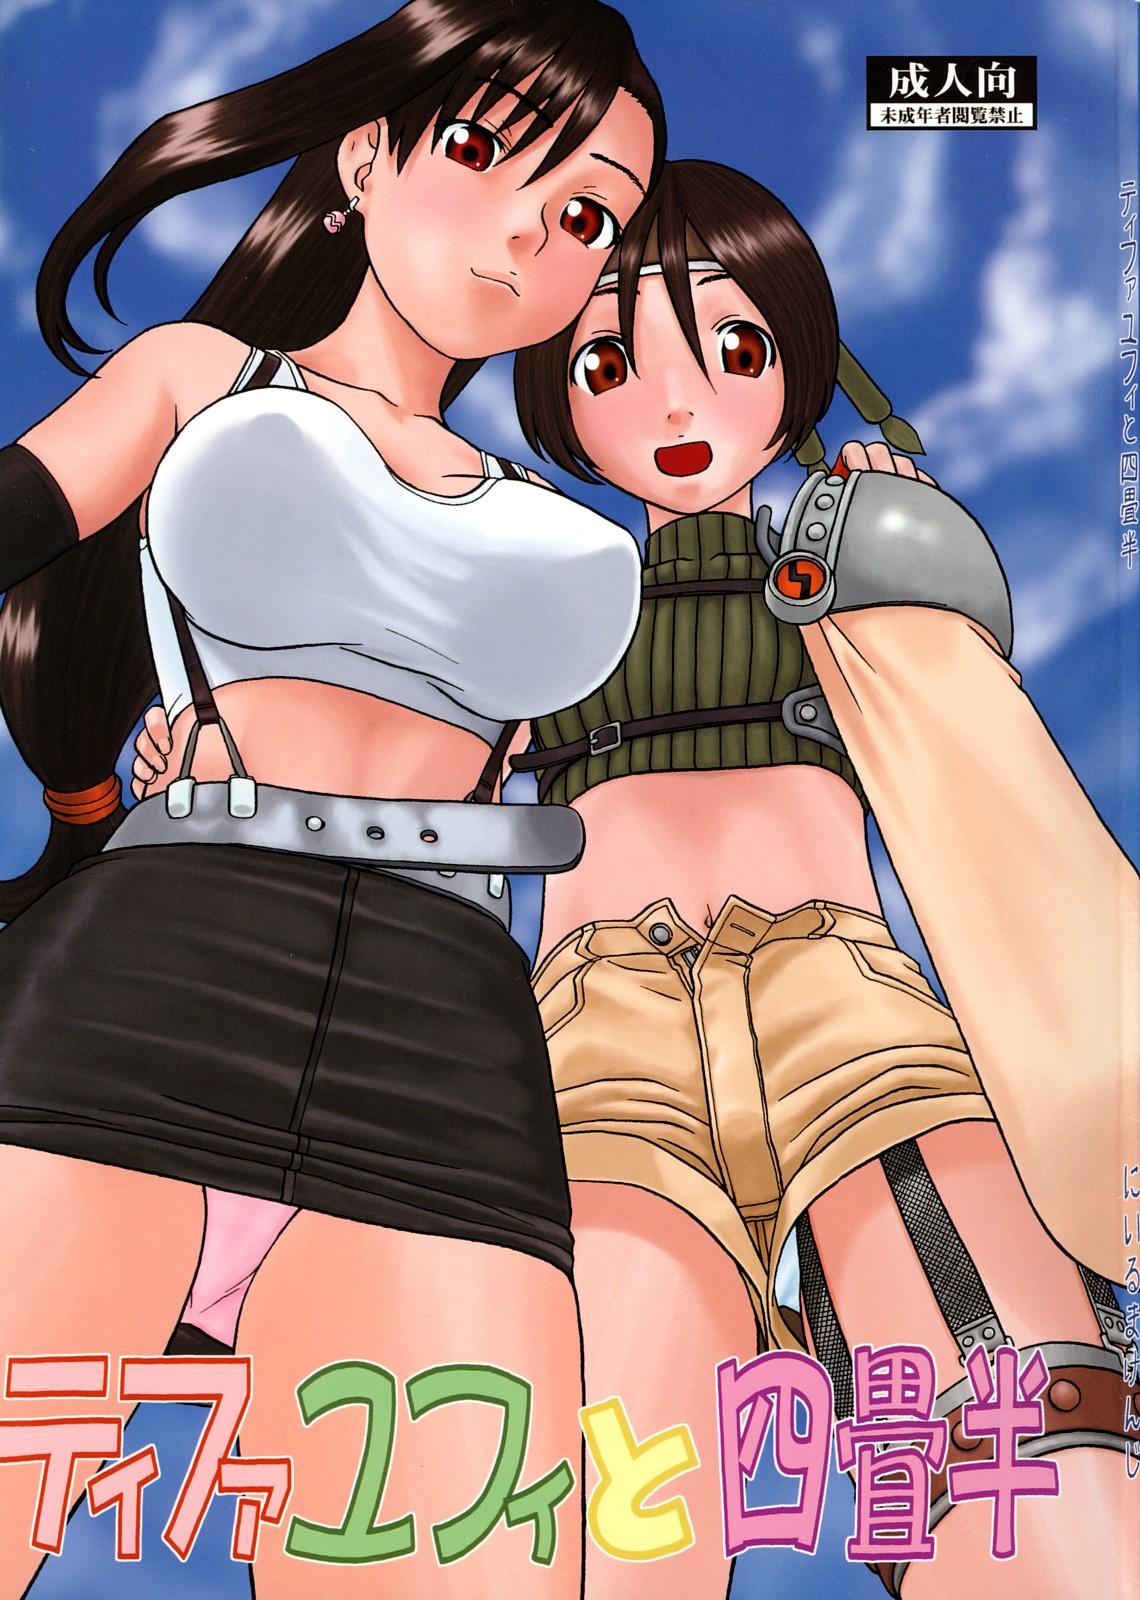 Amateur Teen Tifa to Yuffie to Yojouhan - Final fantasy vii Squirters - Page 1